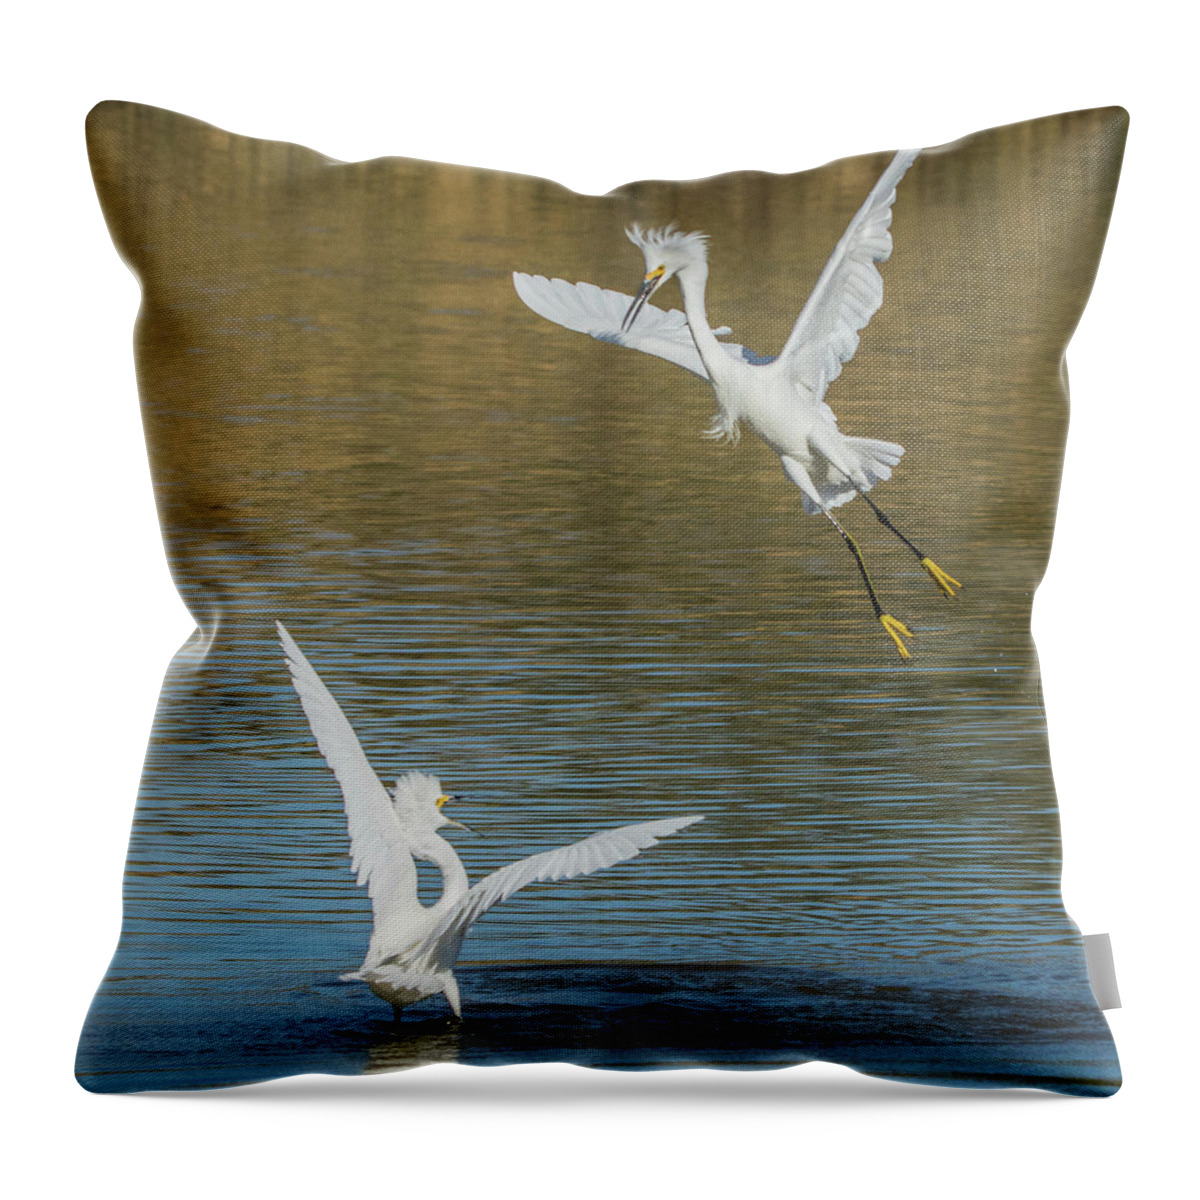 Snowy Throw Pillow featuring the photograph Snowy Egrets Dispute 3612-112317-1cr by Tam Ryan